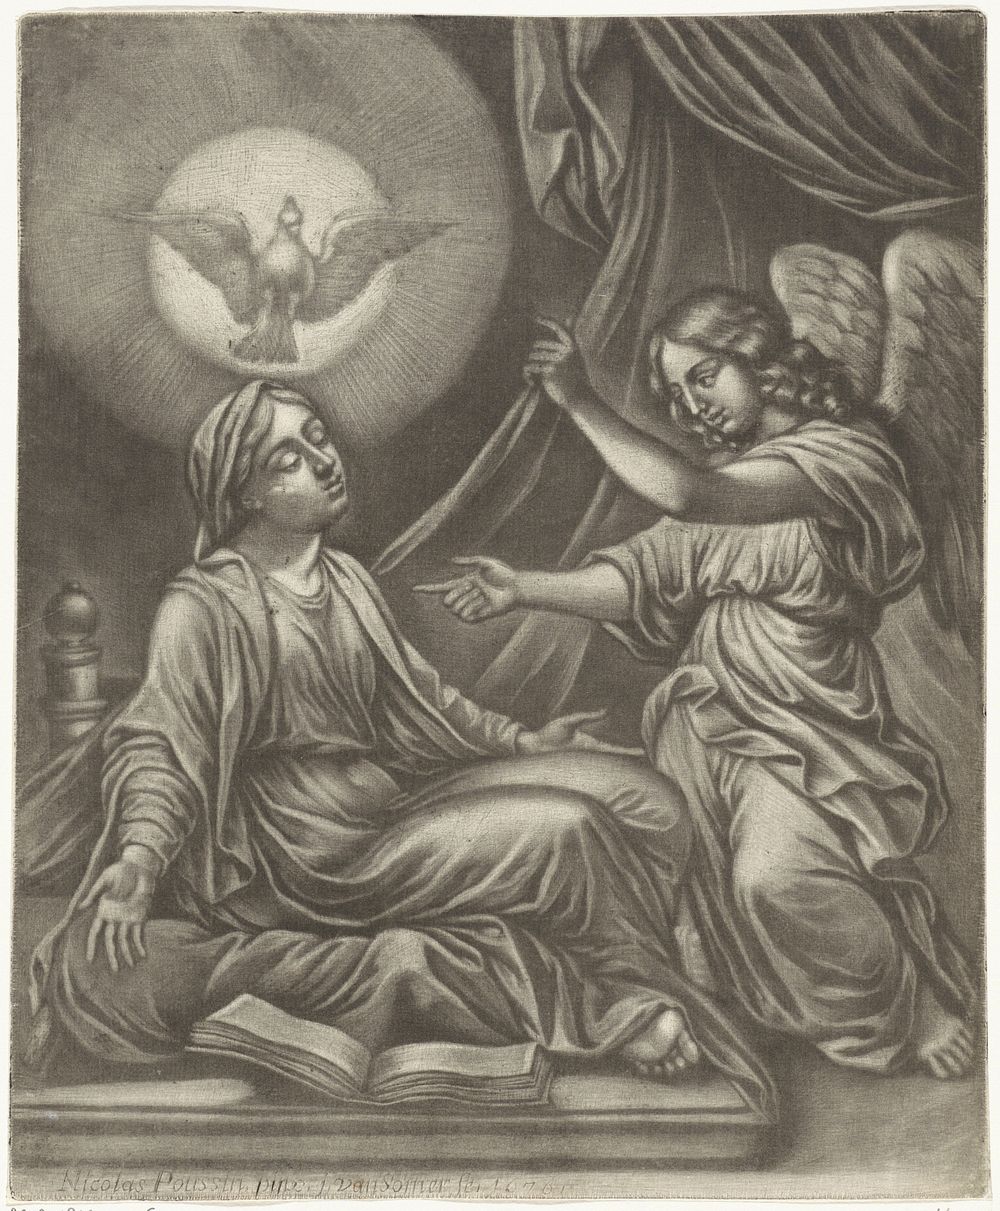 Annunciatie (1676) by Jan van Somer and Nicolas Poussin